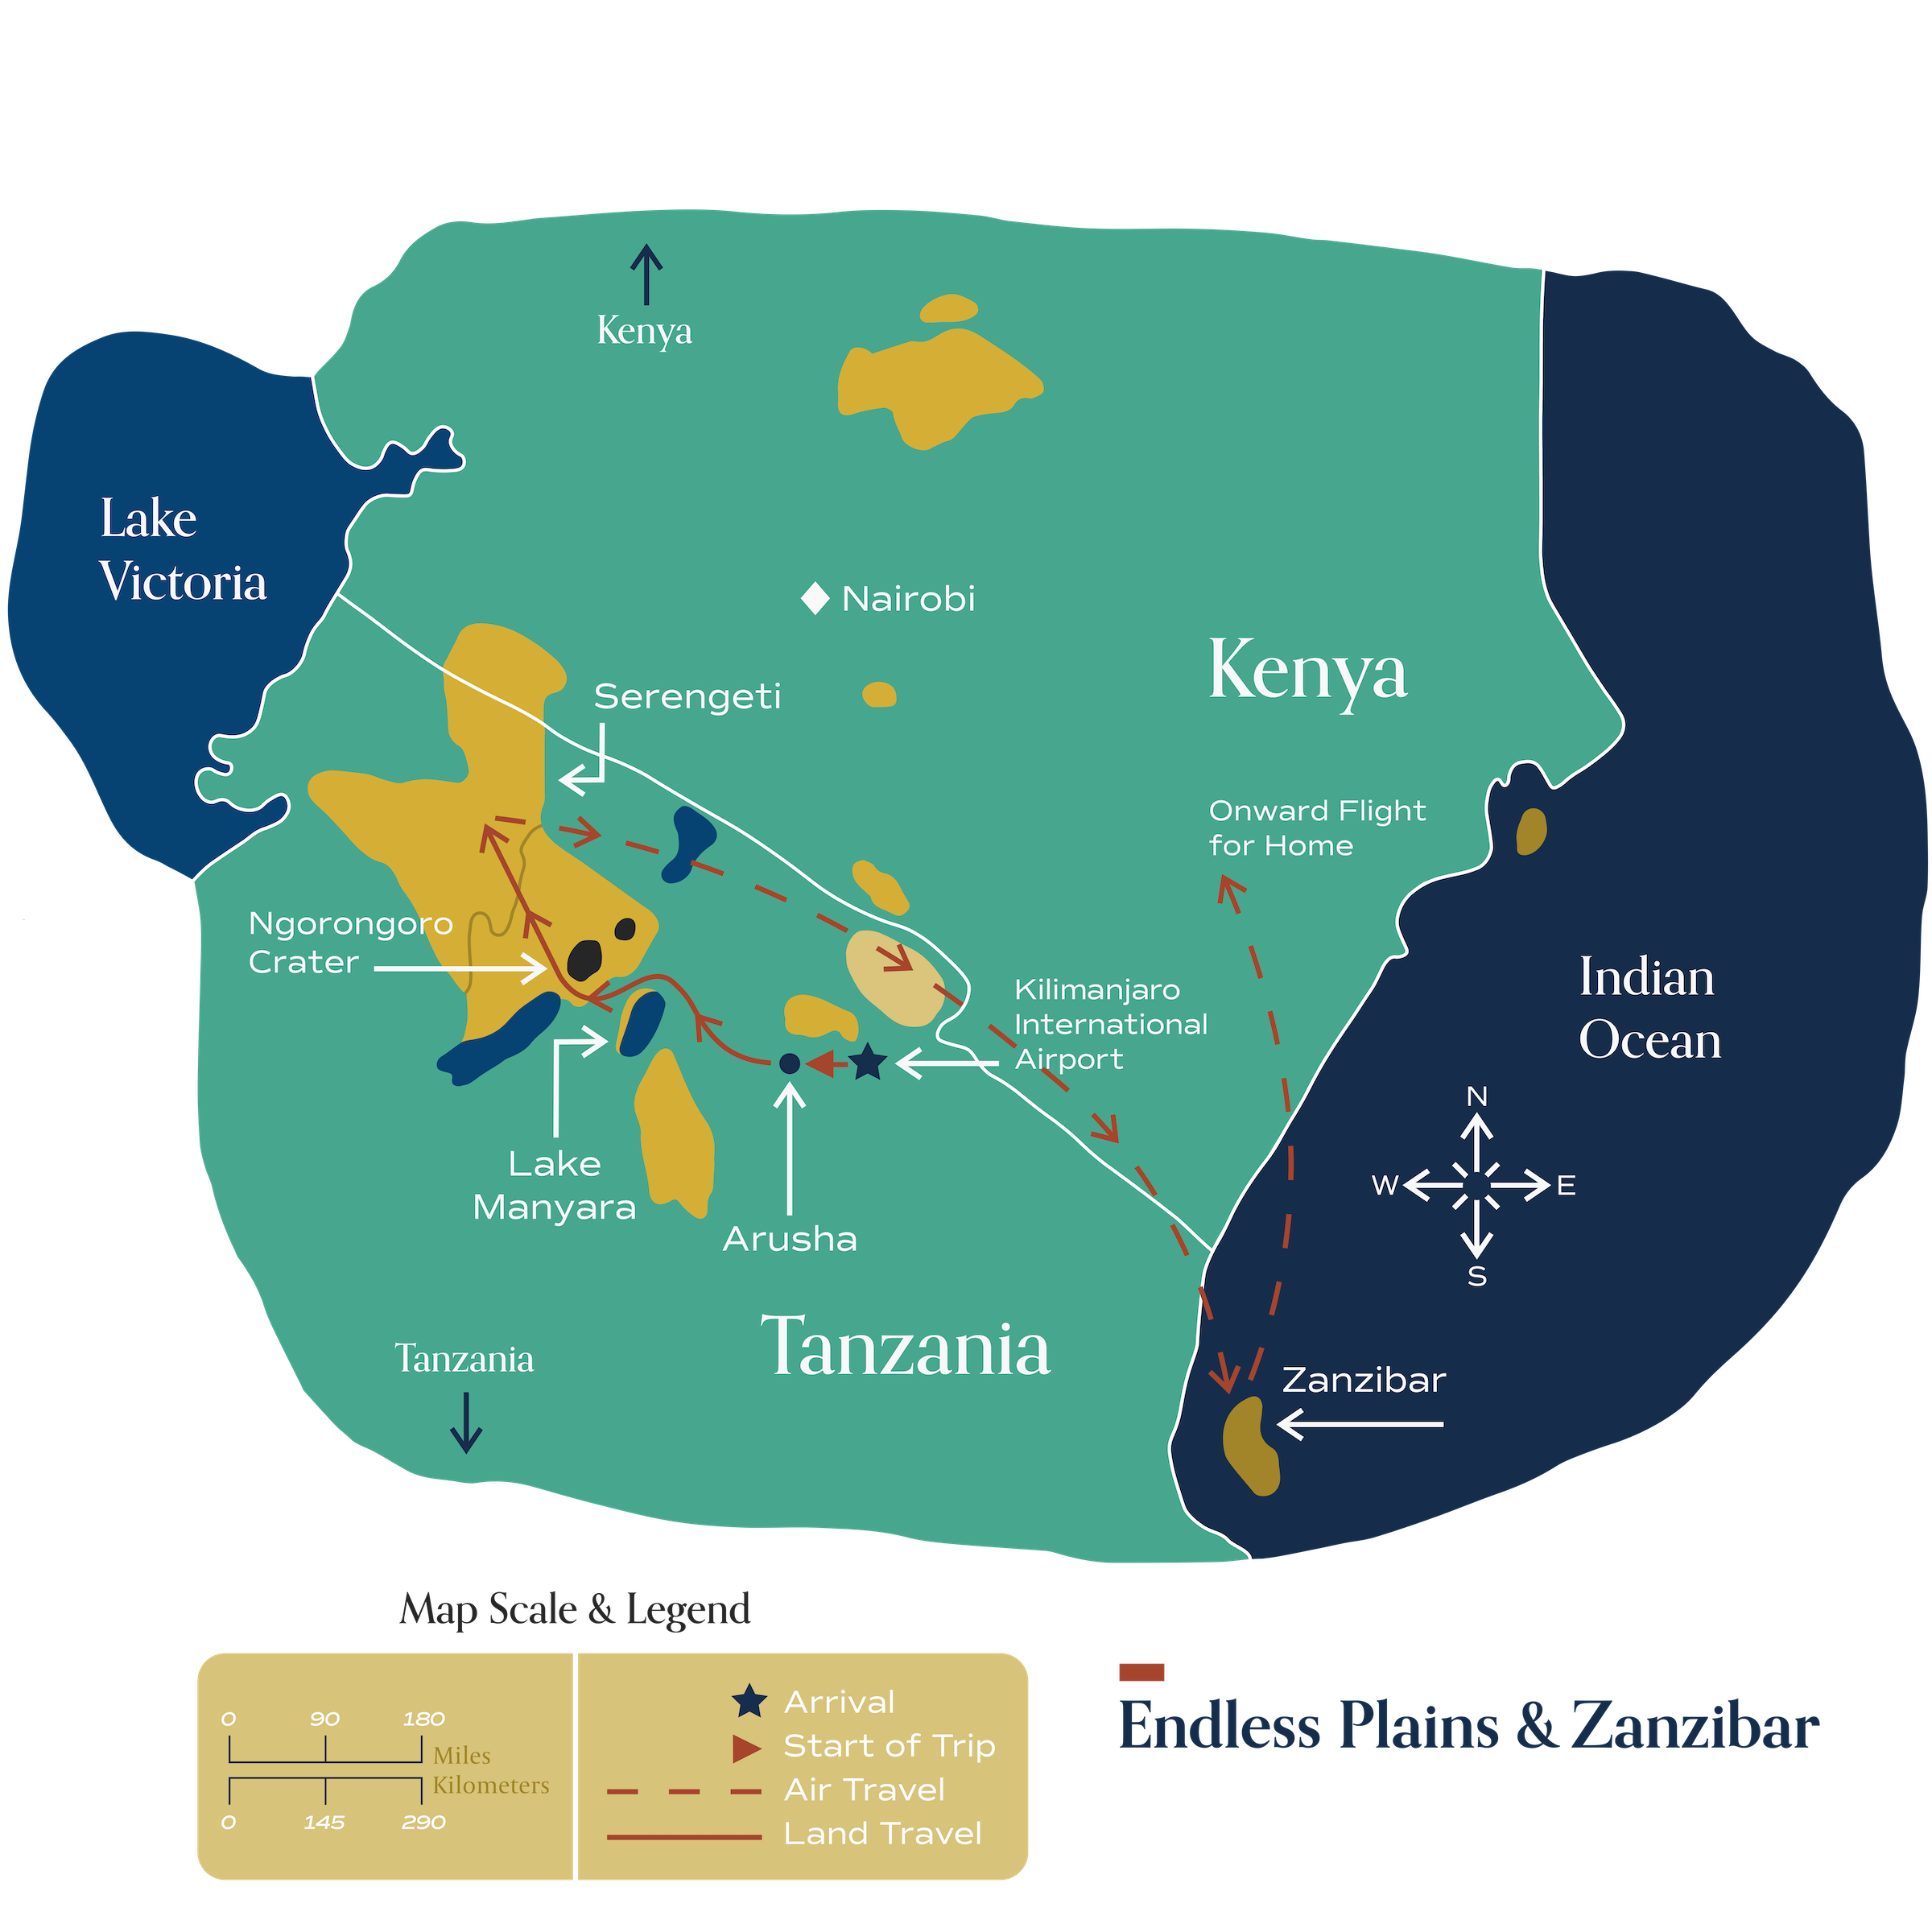 This map visually depicts Metamo's "Essence of Tanzania" journey.